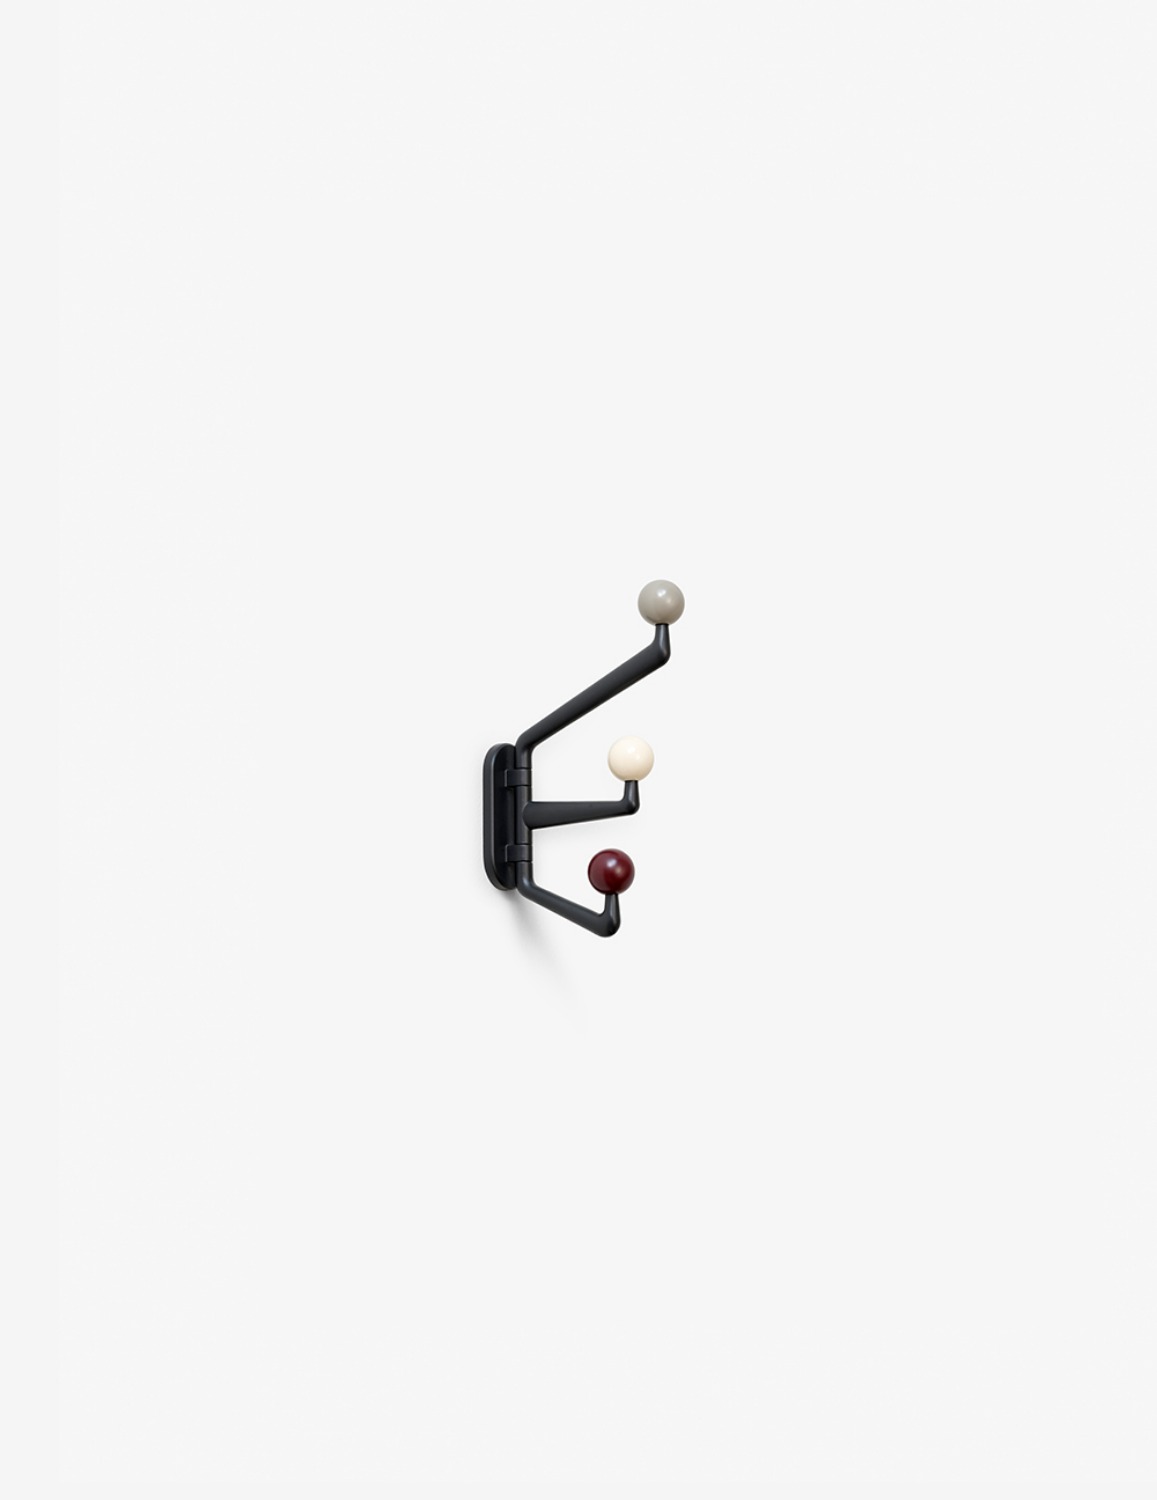 [&amp;Tradition] Capture hooks (Small) / SC74